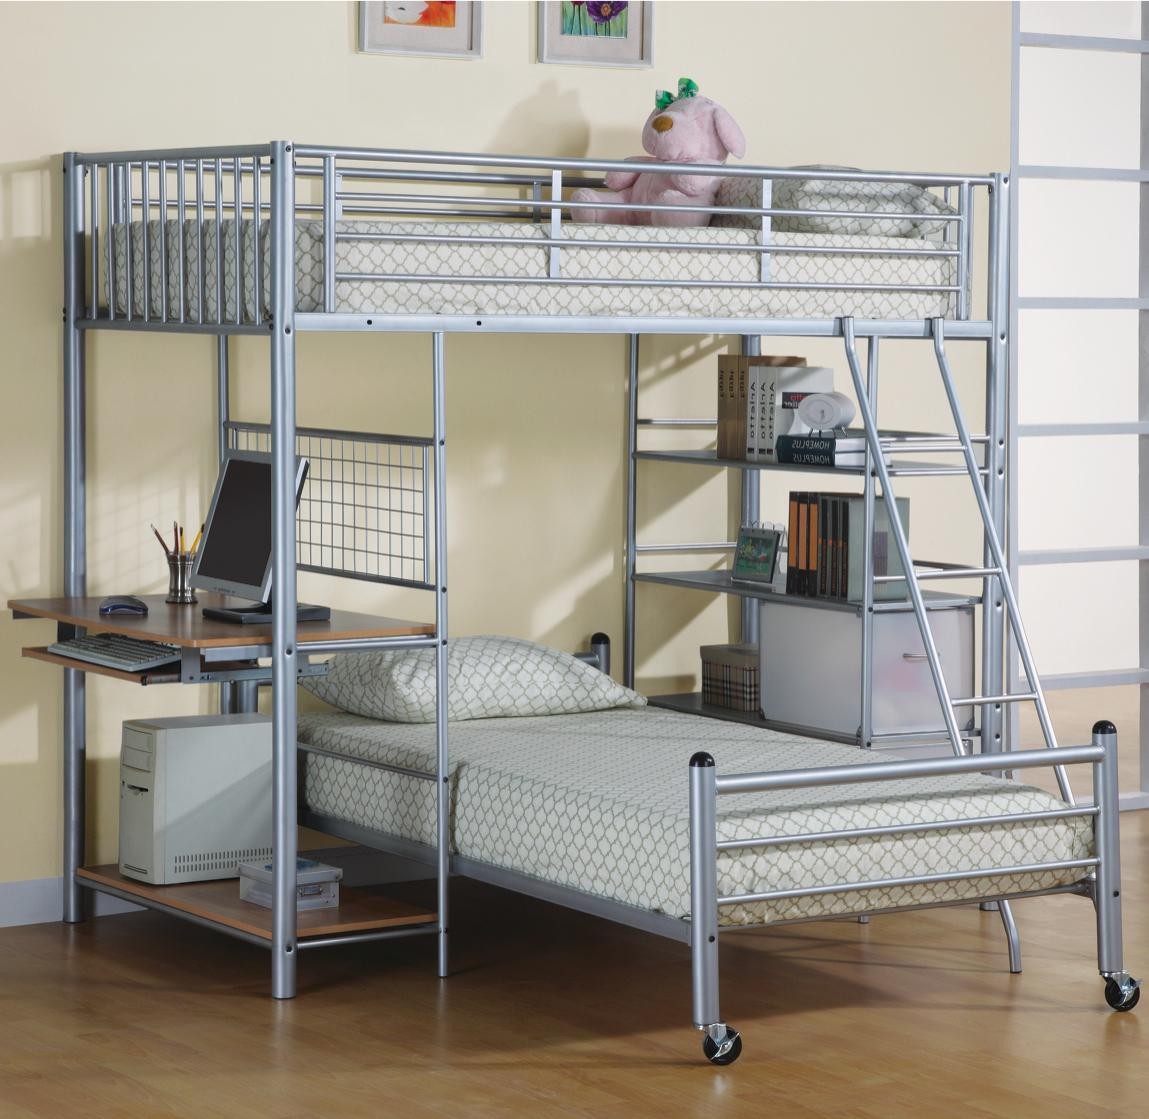 twin beds with bed underneath